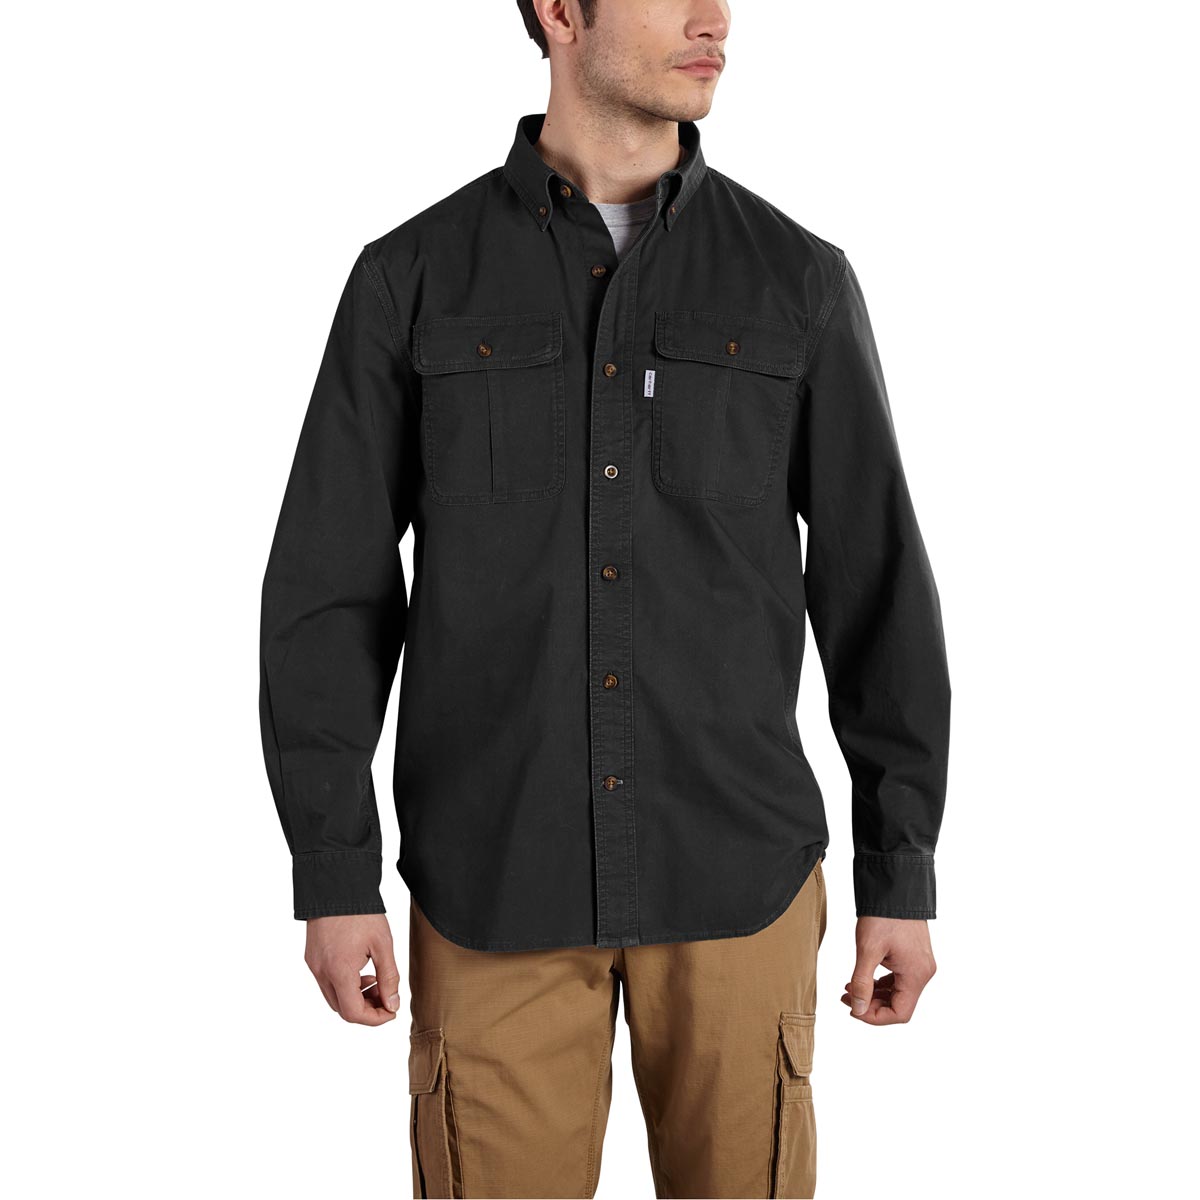 Carhartt Men's Long Sleeve Solid Work Shirt Discontinued Pricing